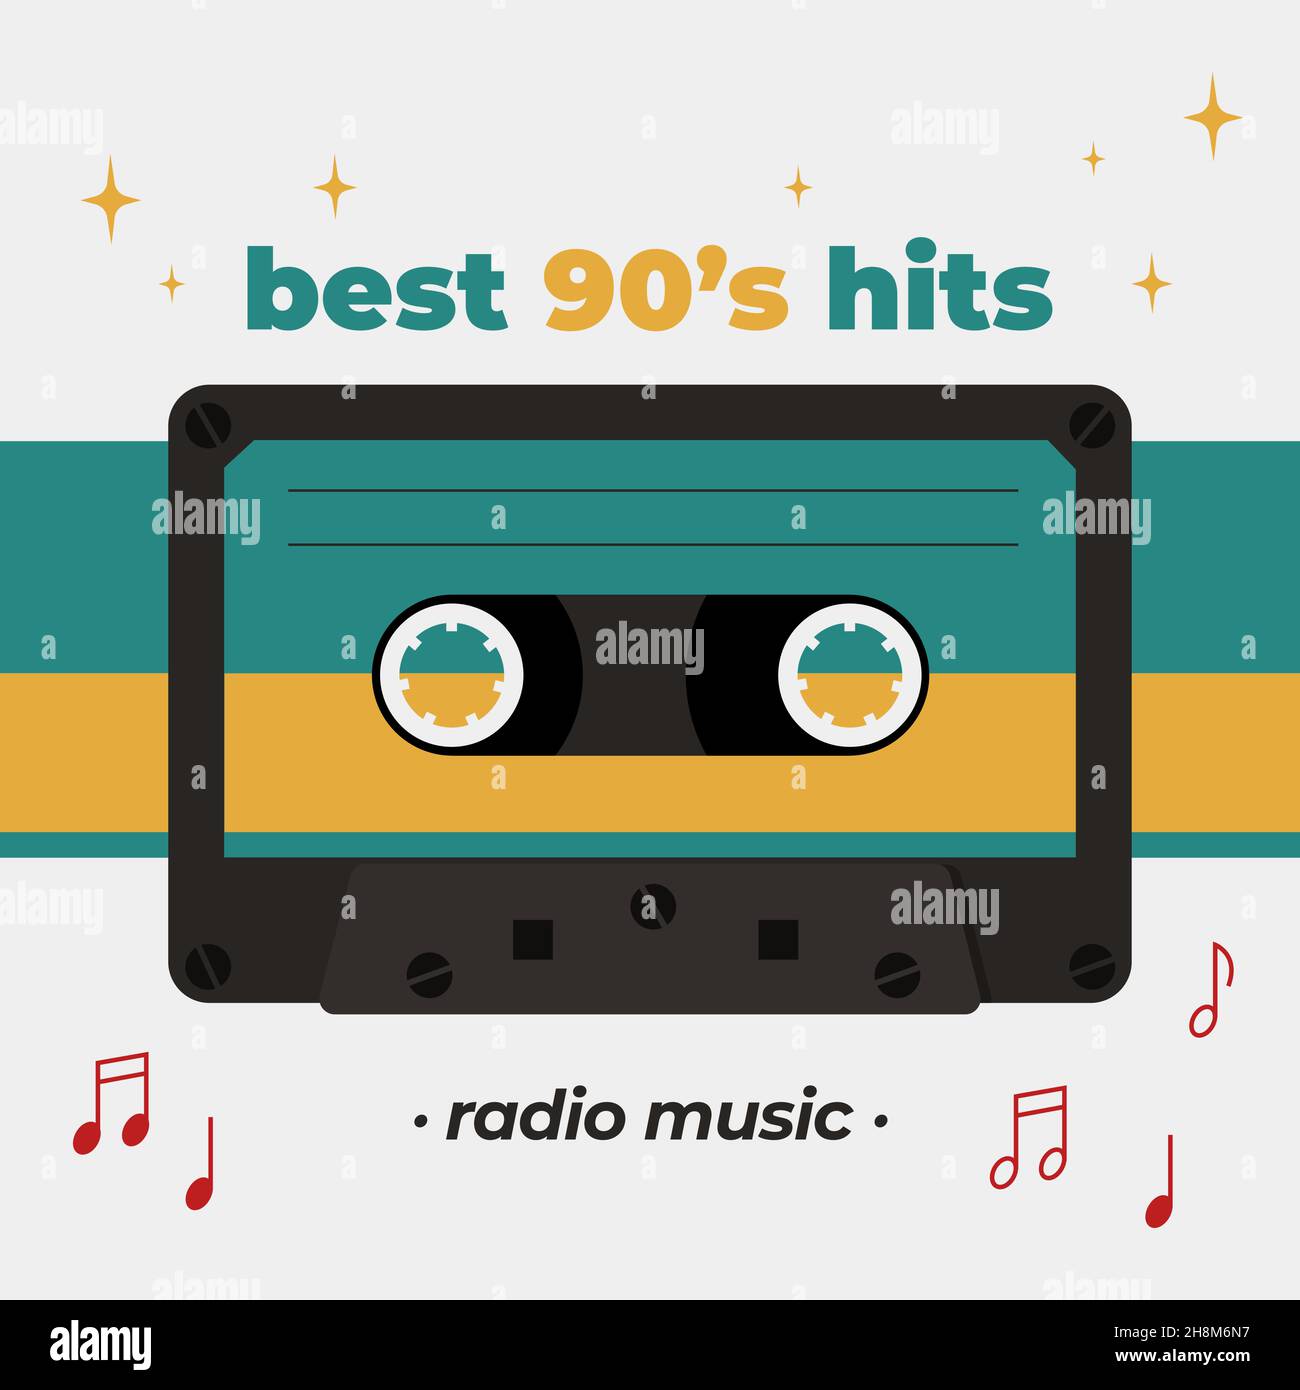 Best 90 s hits poster with compact cassette image. Vector retro style illustration Stock Vector